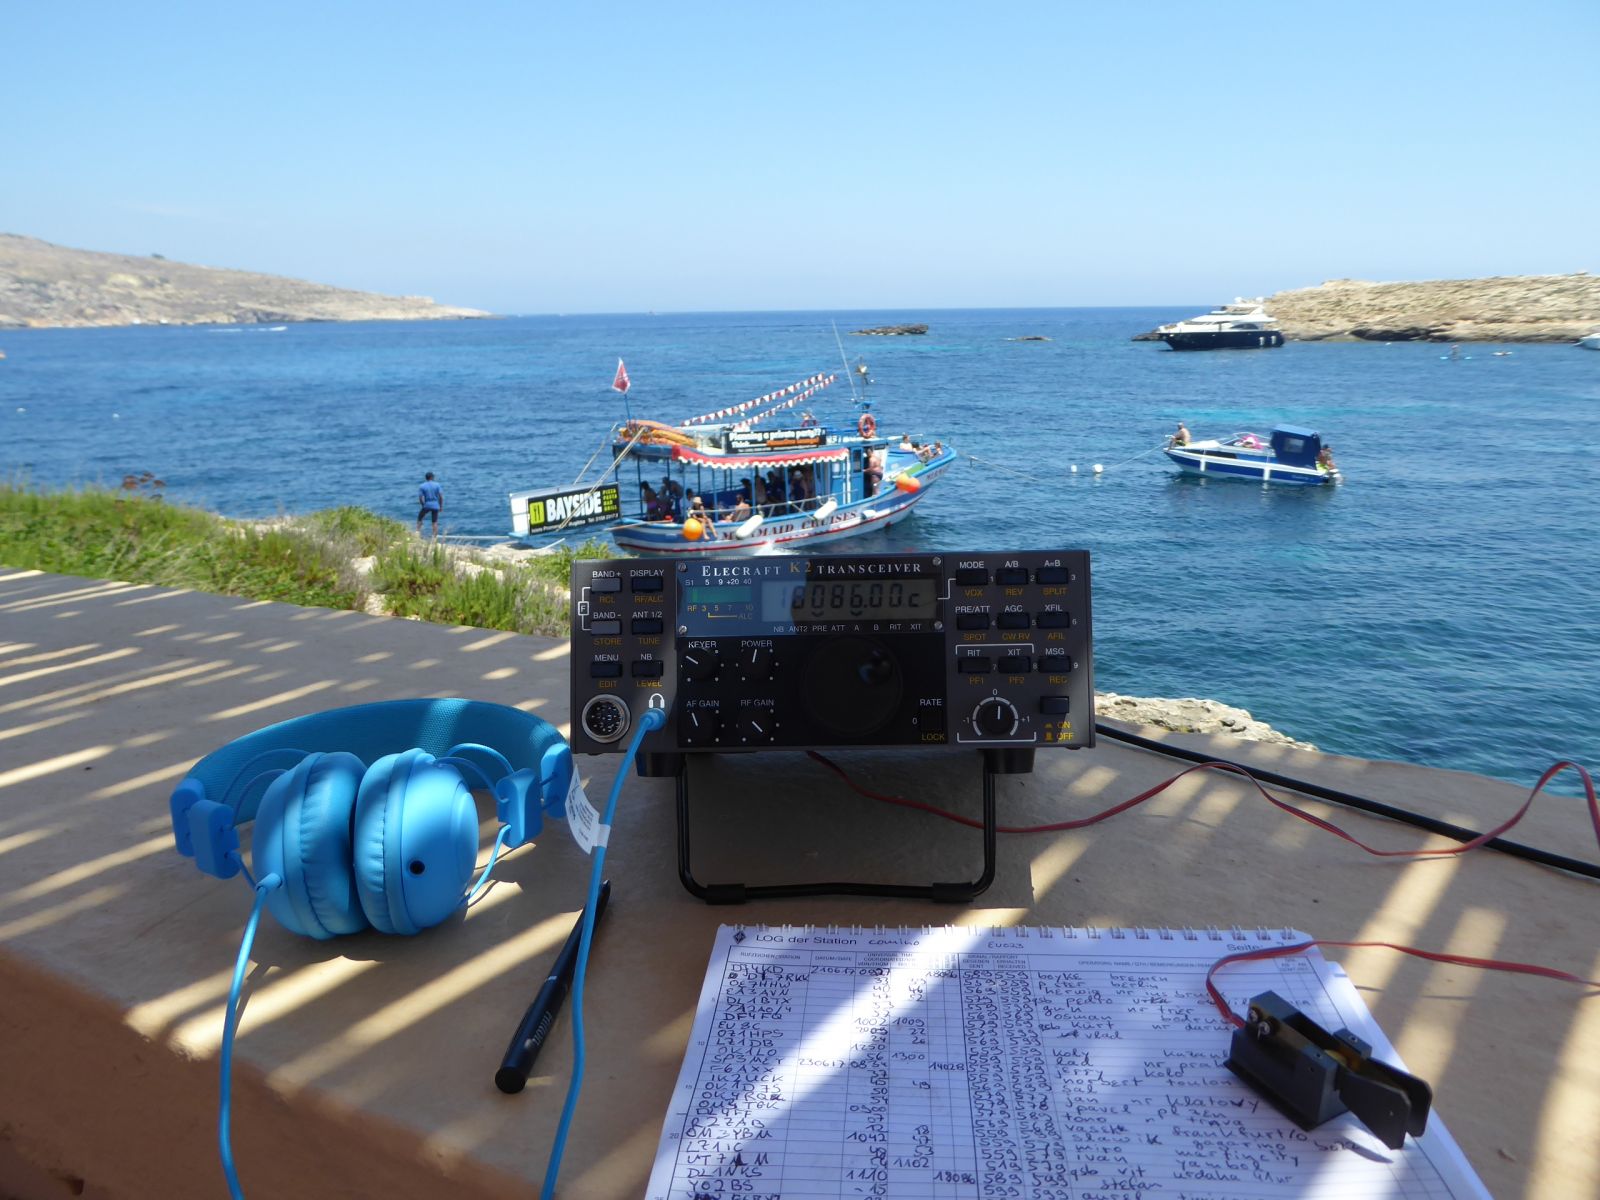 Operating as 9H3ND on Comino Island